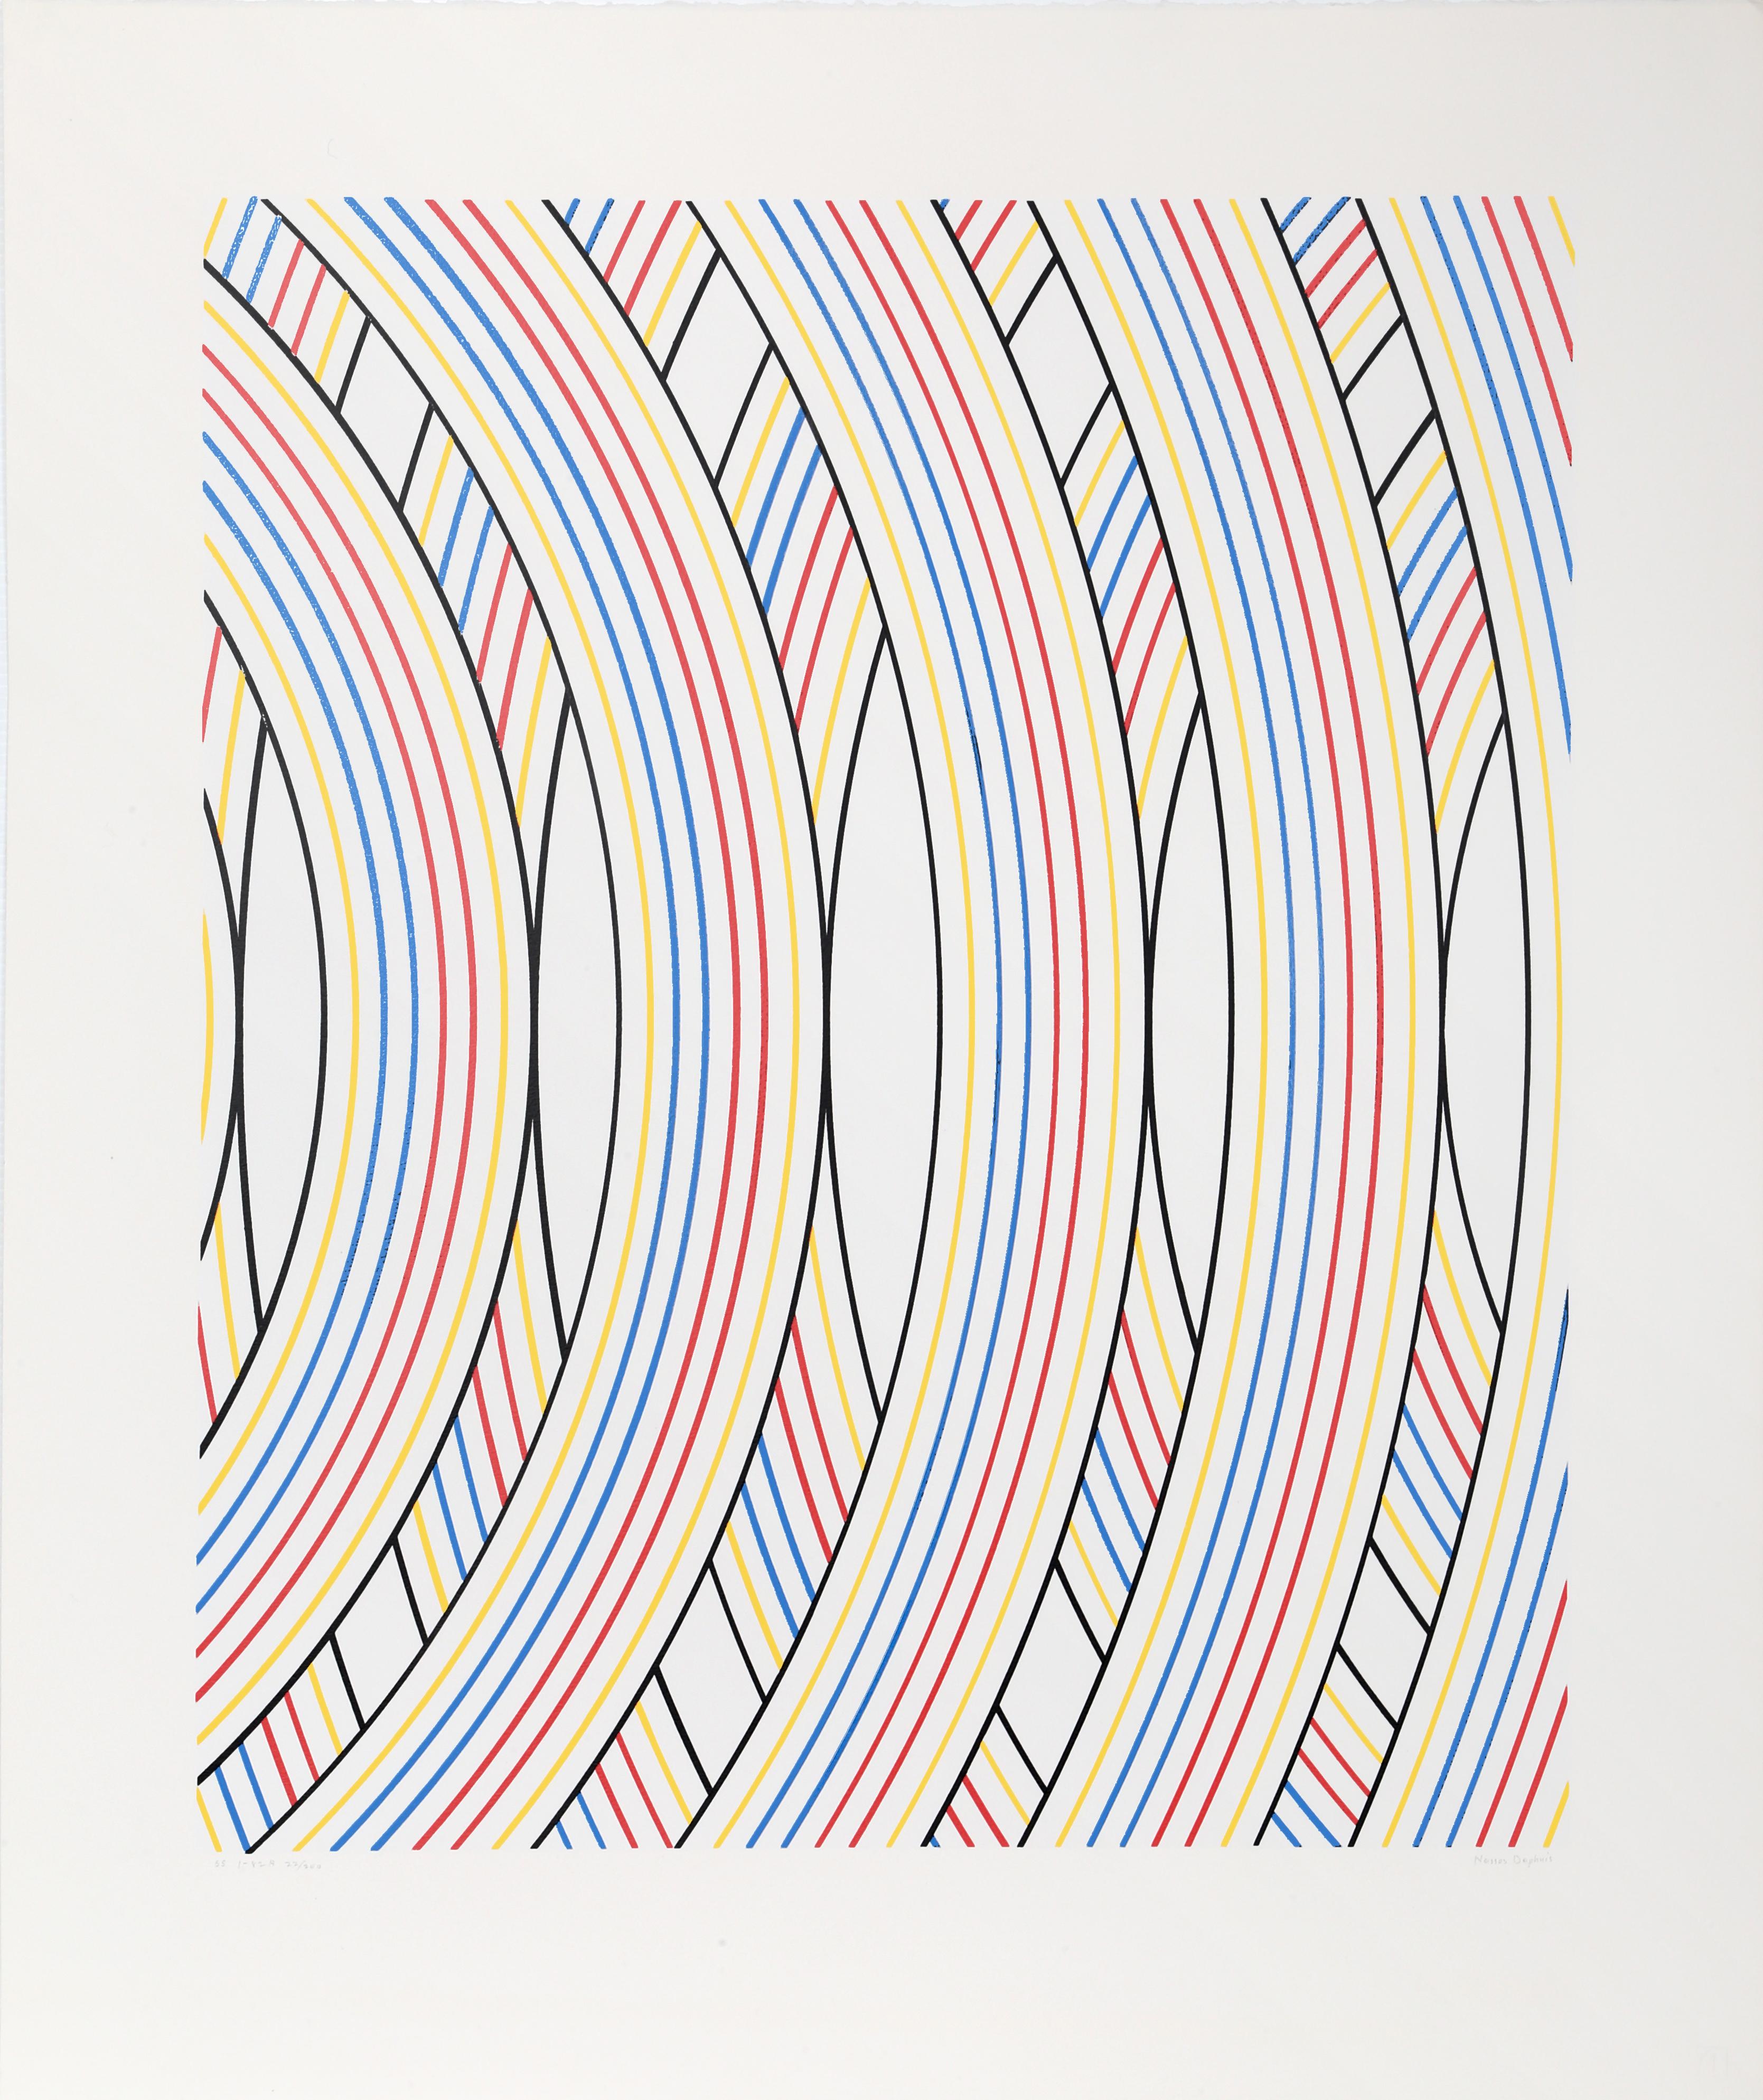 Artist:  Nassos Daphnis, Greek (1914 - 2010)
Title:  SS 1-82
Year:  1982
Medium:  Silkscreen, signed and numbered in pencil
Edition:  22/120
Size:  35.75  x 30 in. (90.81  x 76.2 cm)